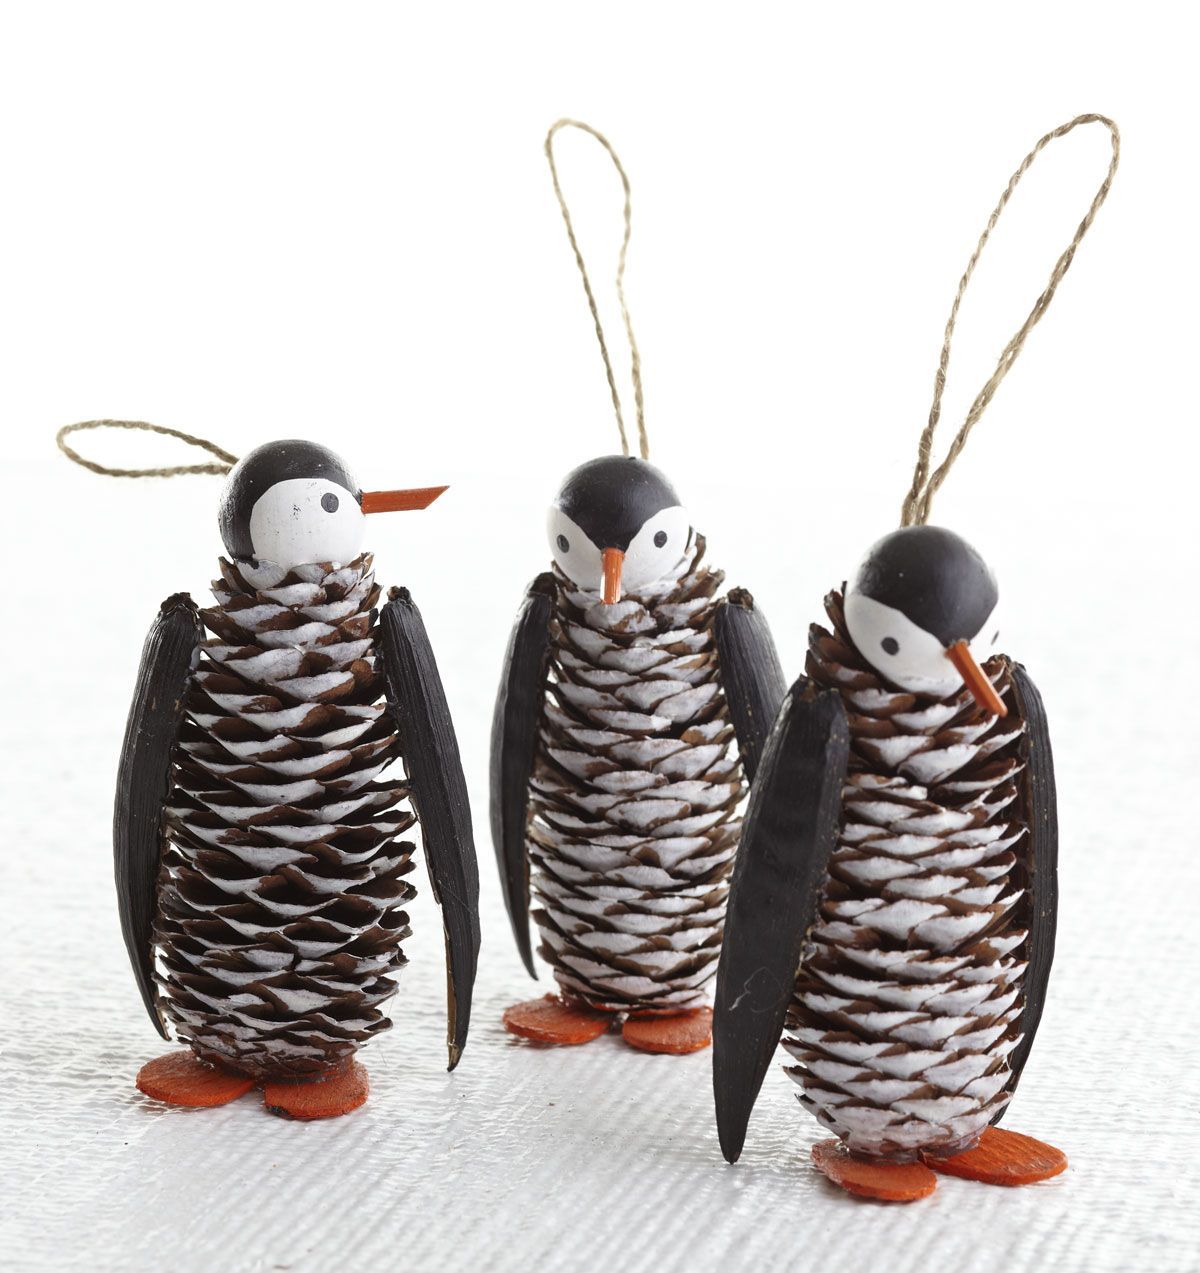 pinecone penguins @Shawna Smeathers Smeathers Smeathers Smeathers Smeathers Bergene Bergene Apps (ever consider doing a penguin